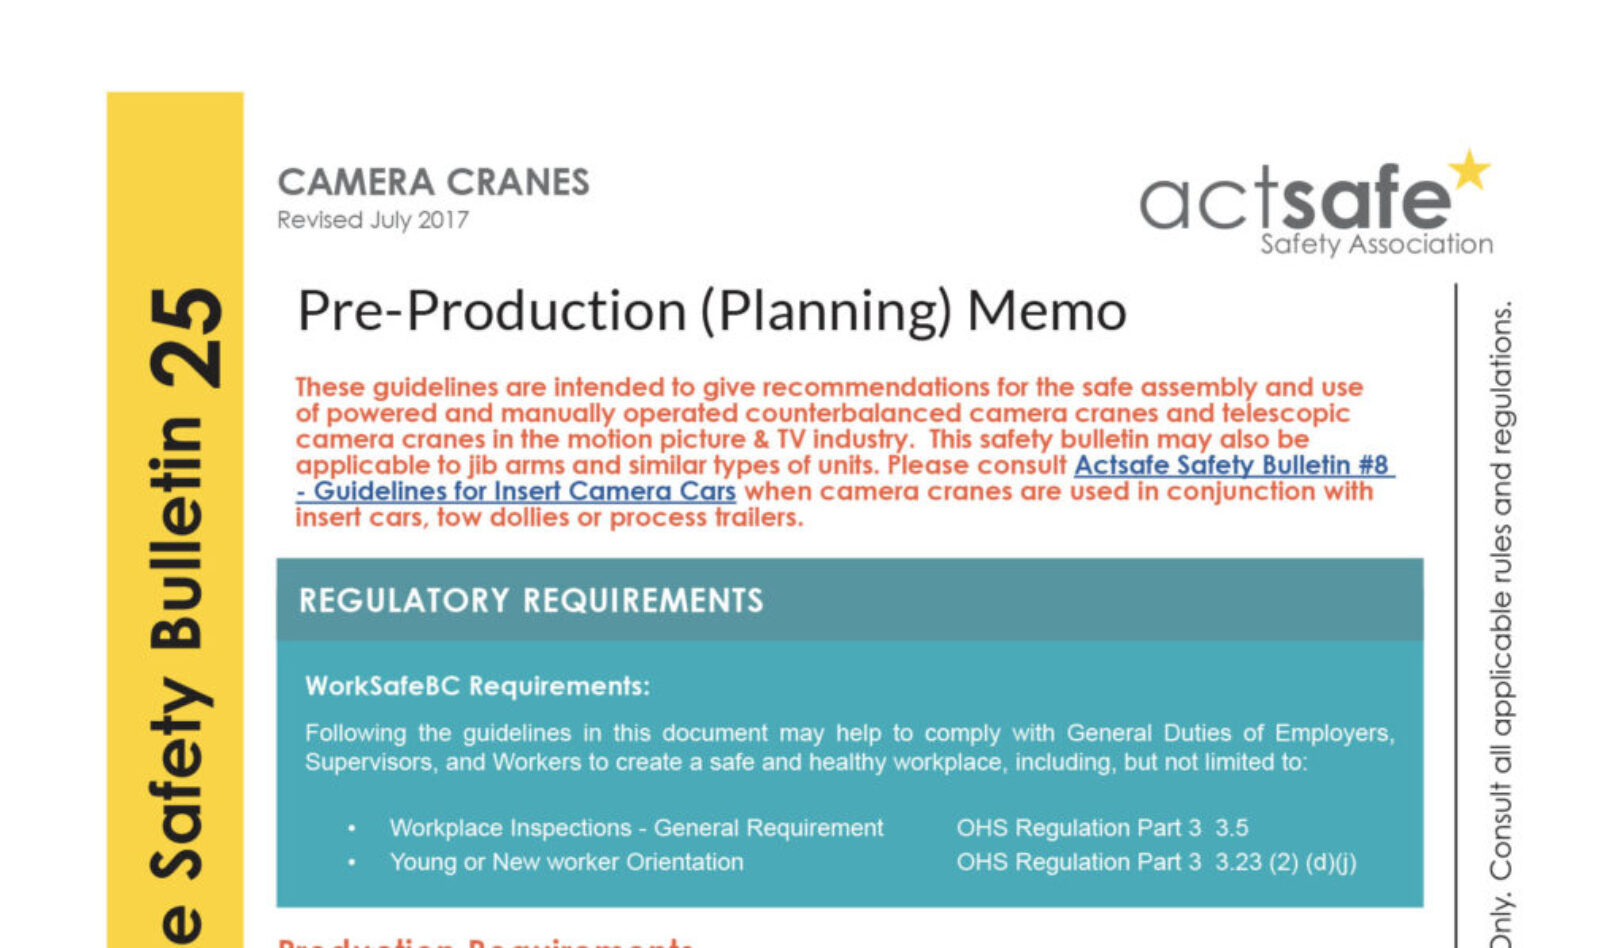 #25 Camera Cranes Motion Picture Safety Bulletin